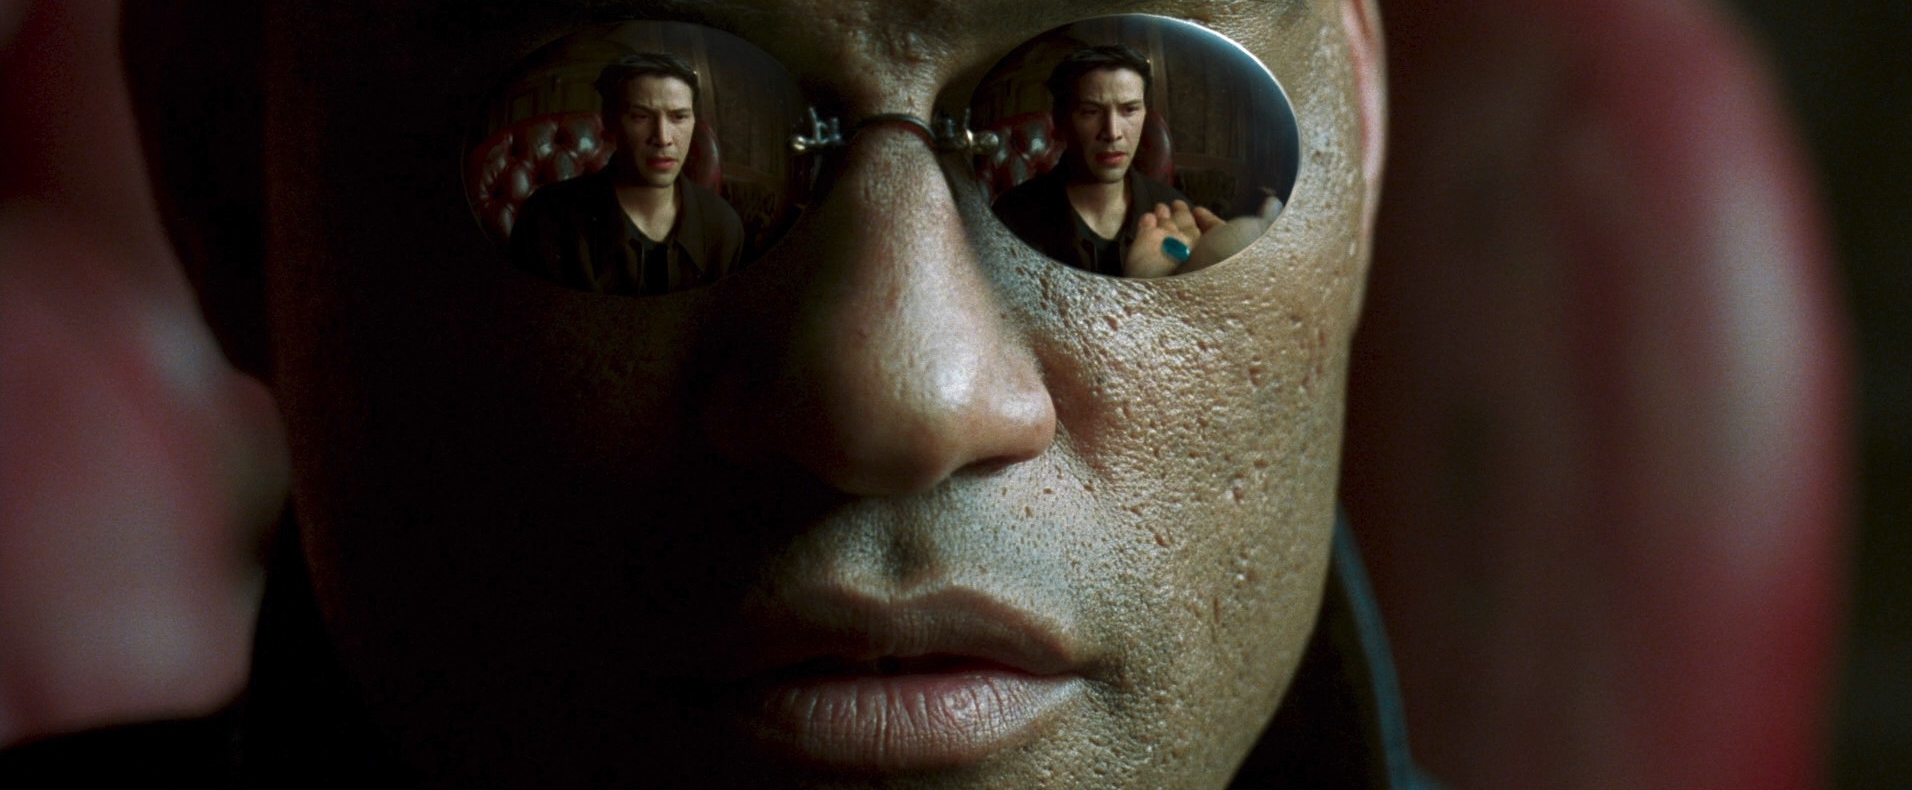 Morpheus close up on mirror sunglasses and neo picking red or blue pill in The Matrix